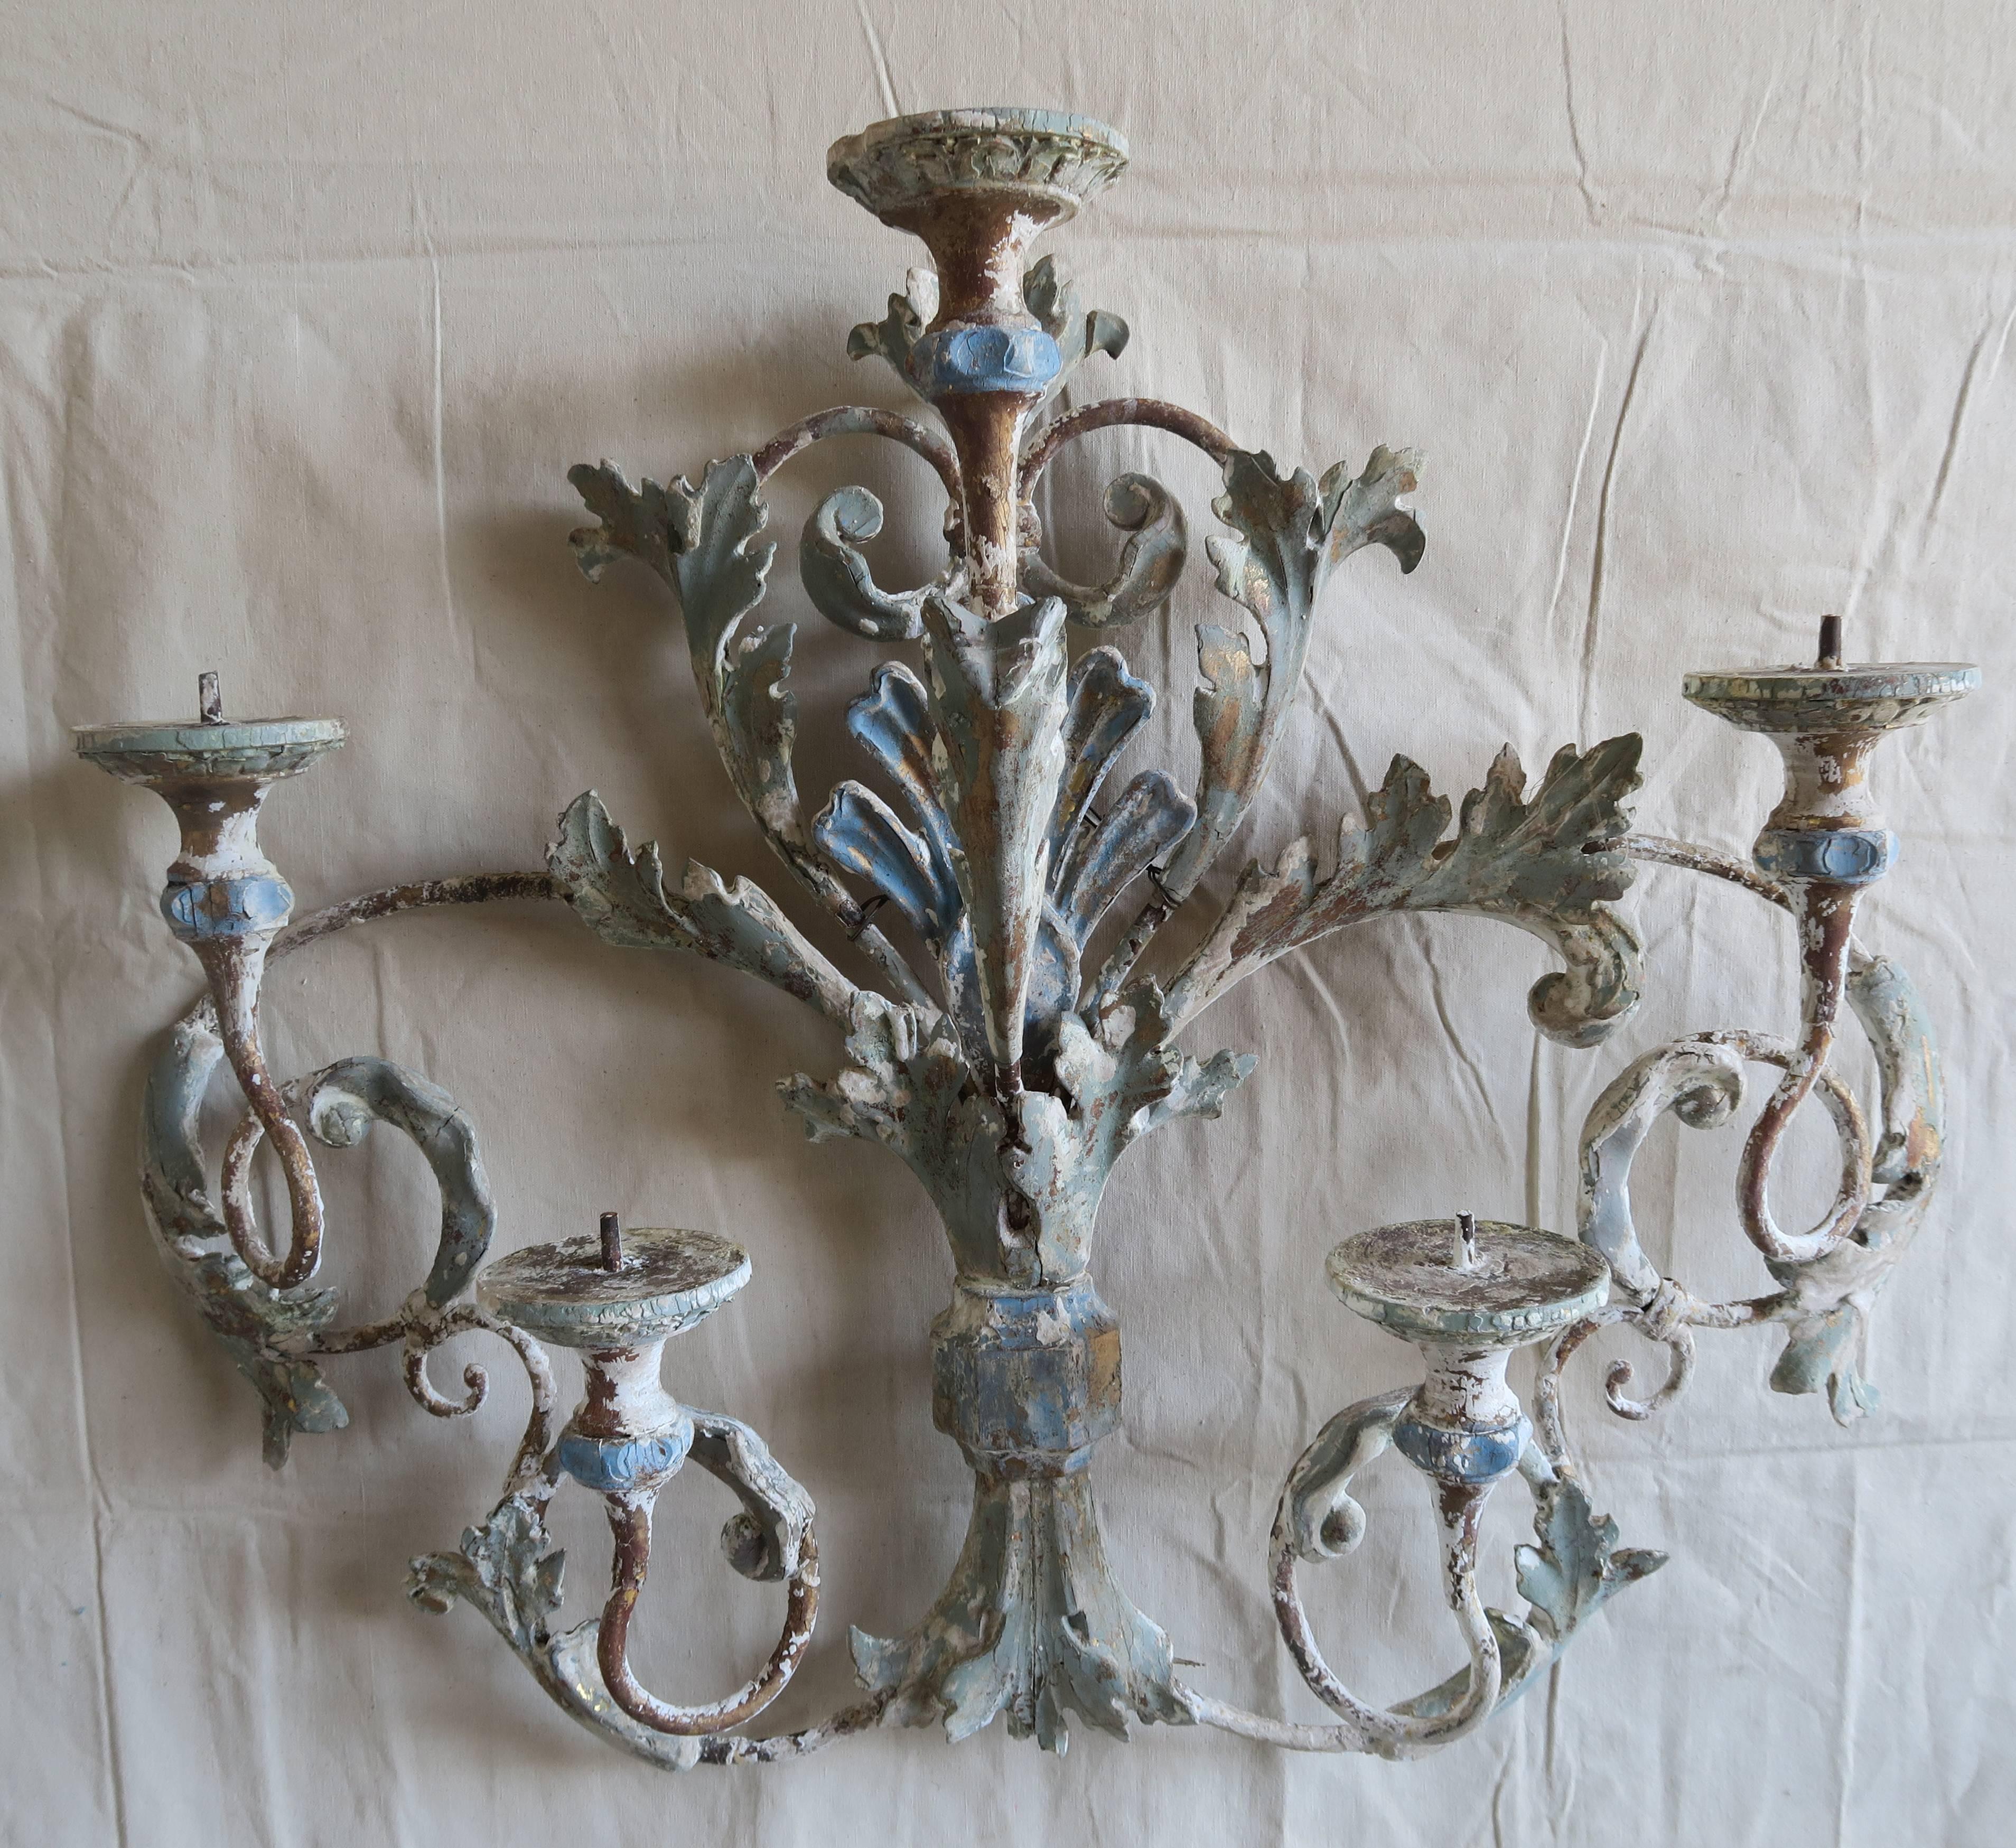 Italian painted iron and wood acanthus leaf five-light wall sconce that can accommodate five candles or it can be wired for electricity.